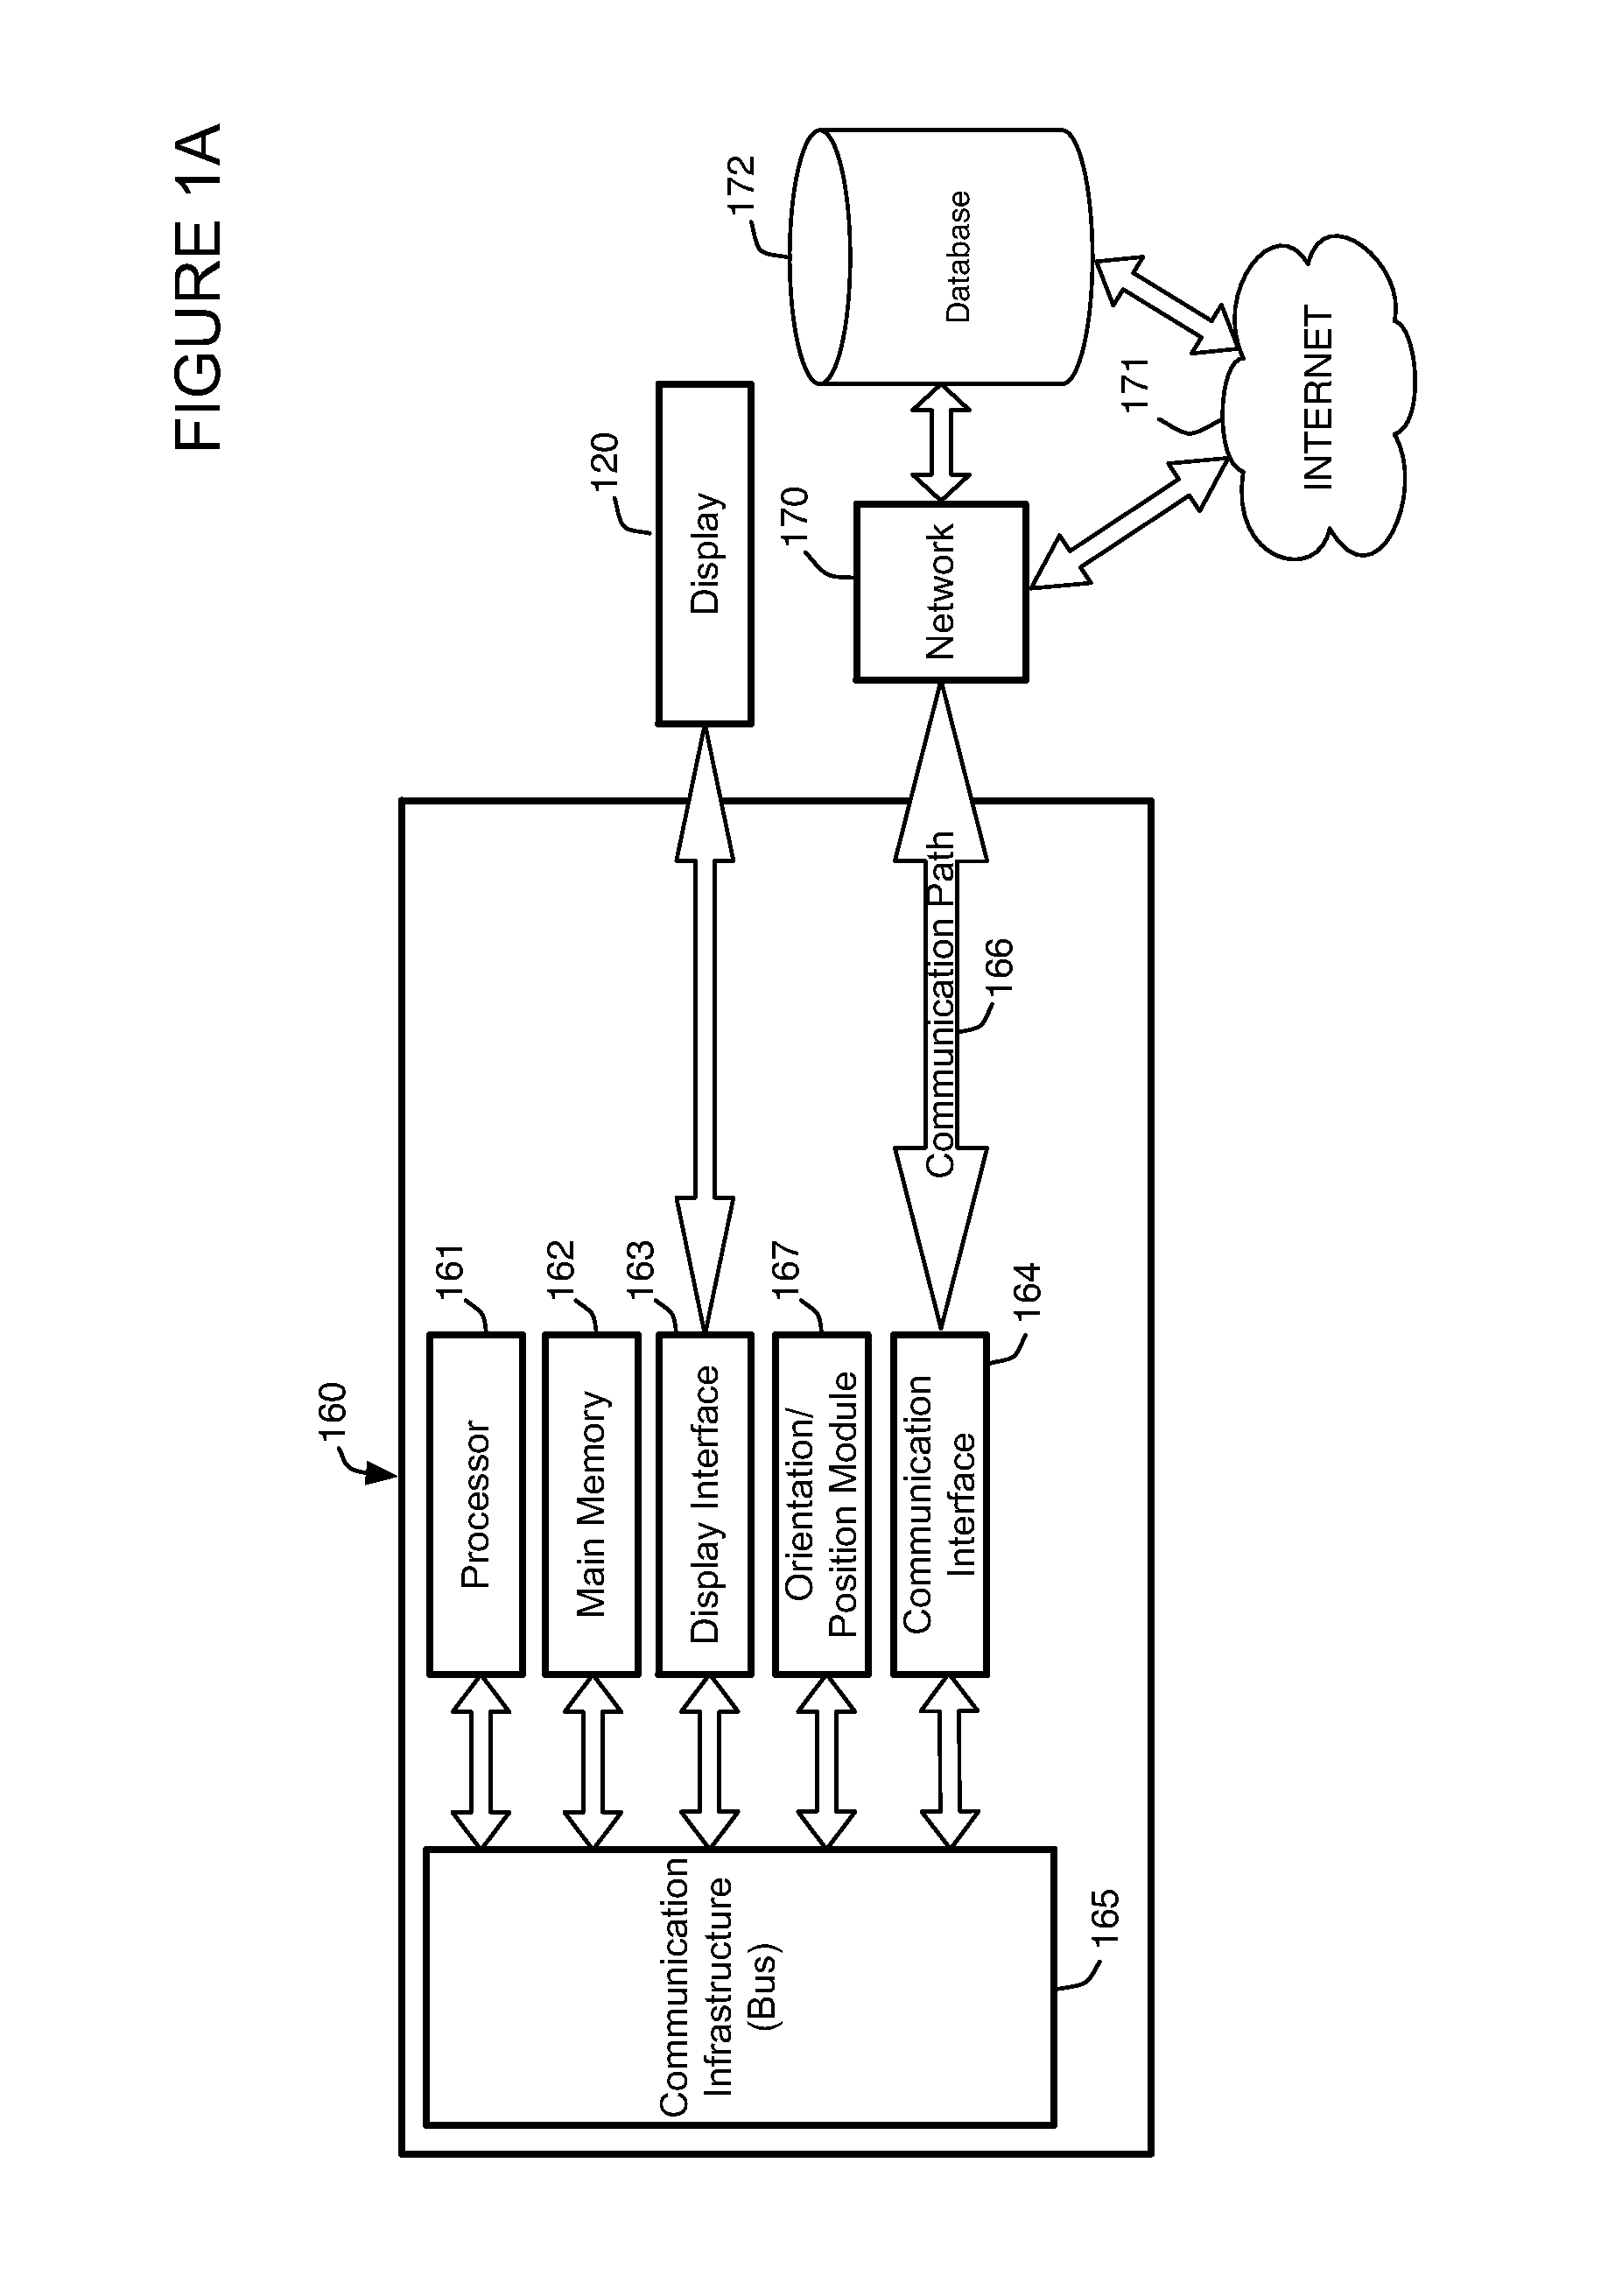 Broadcasting system for broadcasting images with augmented motion data